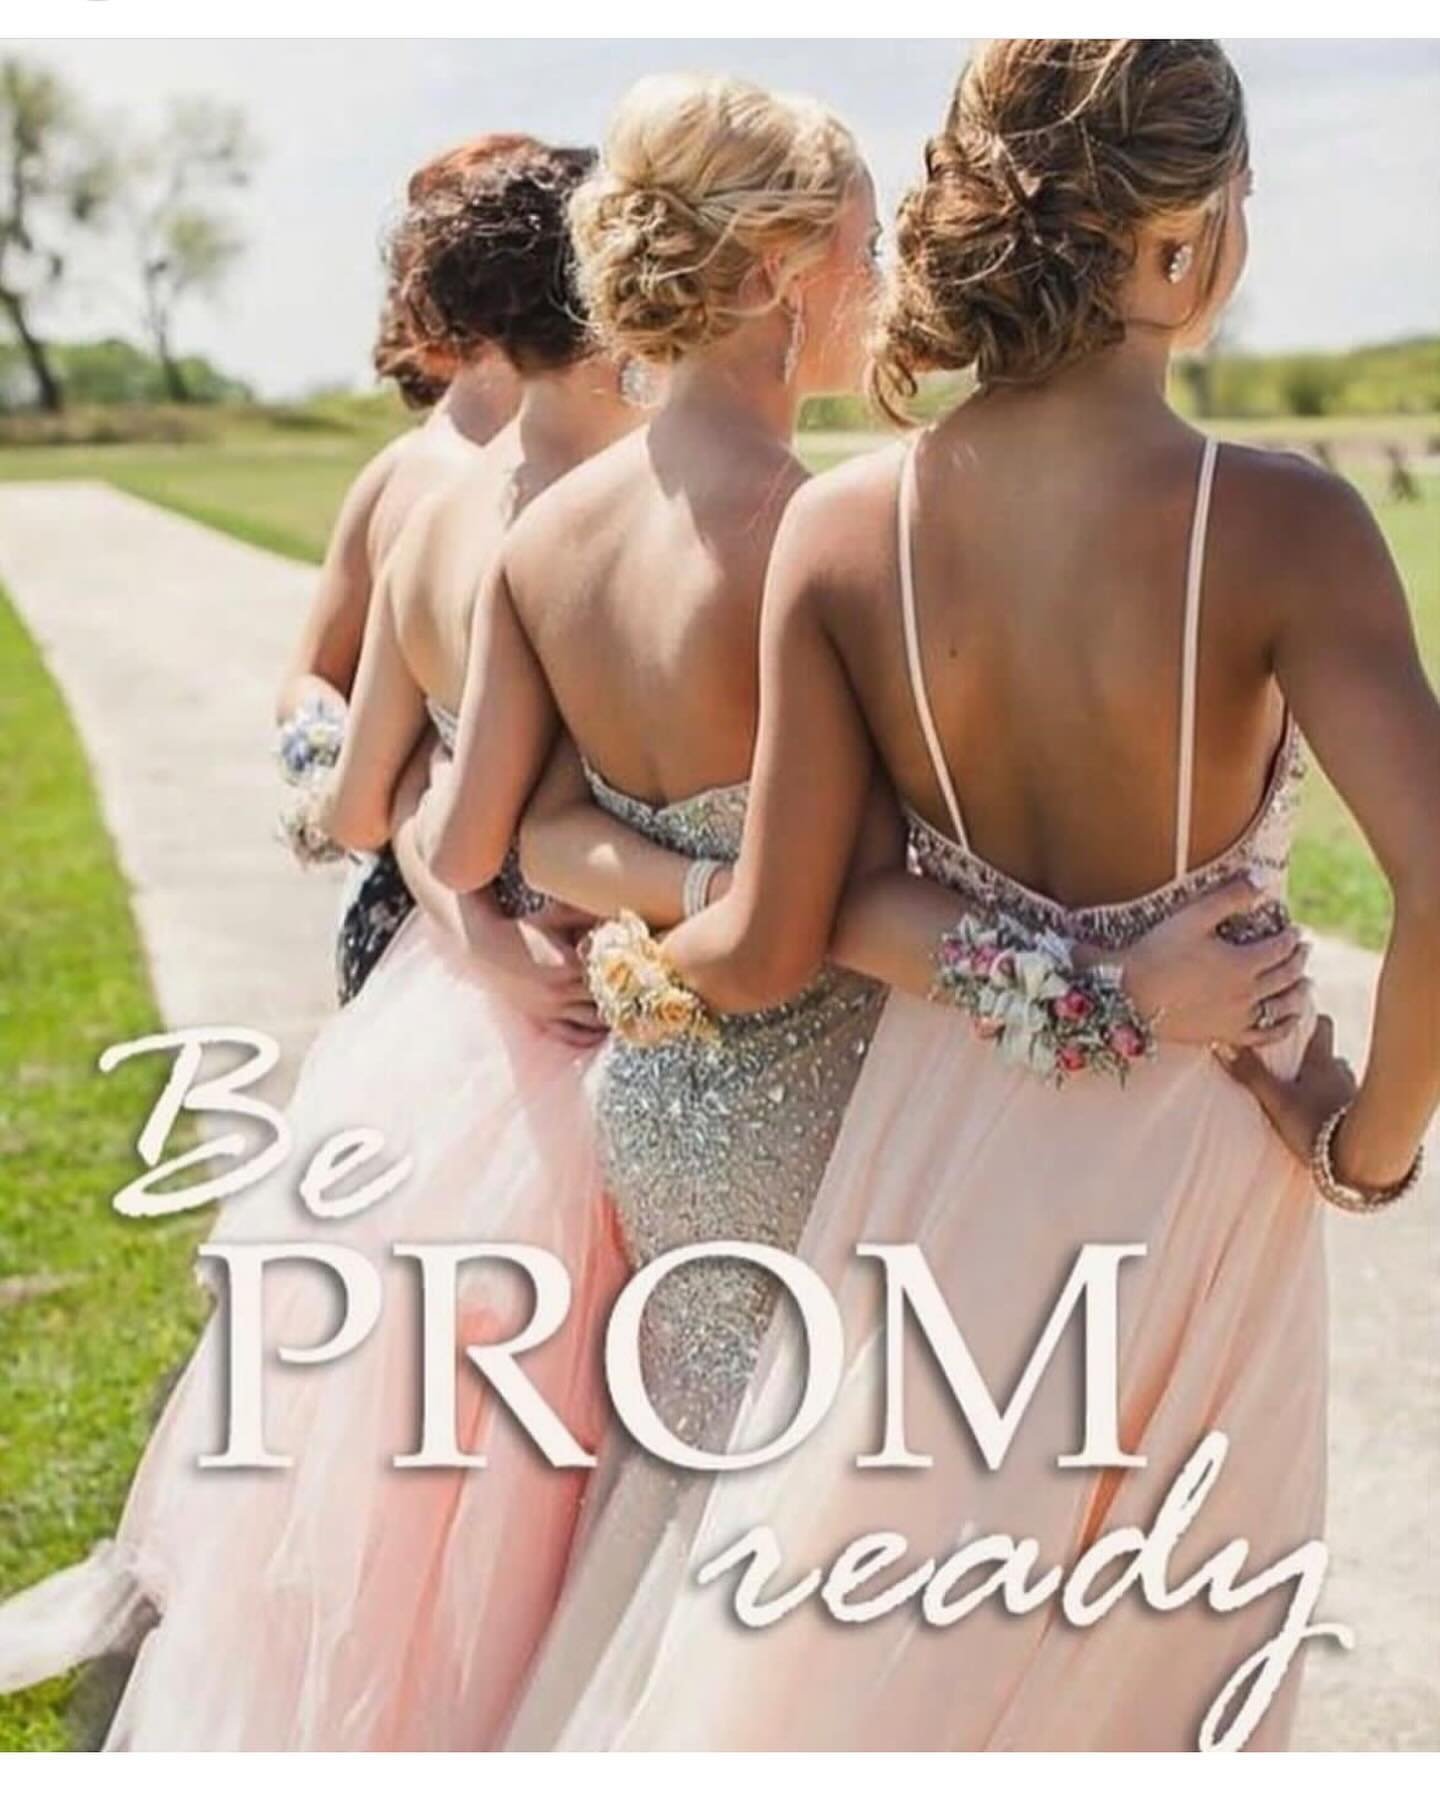 Calling all prom goers! We are here to help you with all your spray tan needs to achieve a healthy glow for your prom night! ✨

We still have openings tomorrow [Friday 4.19] afternoon  if your prom is this weekend or openings the following weeks! 

G